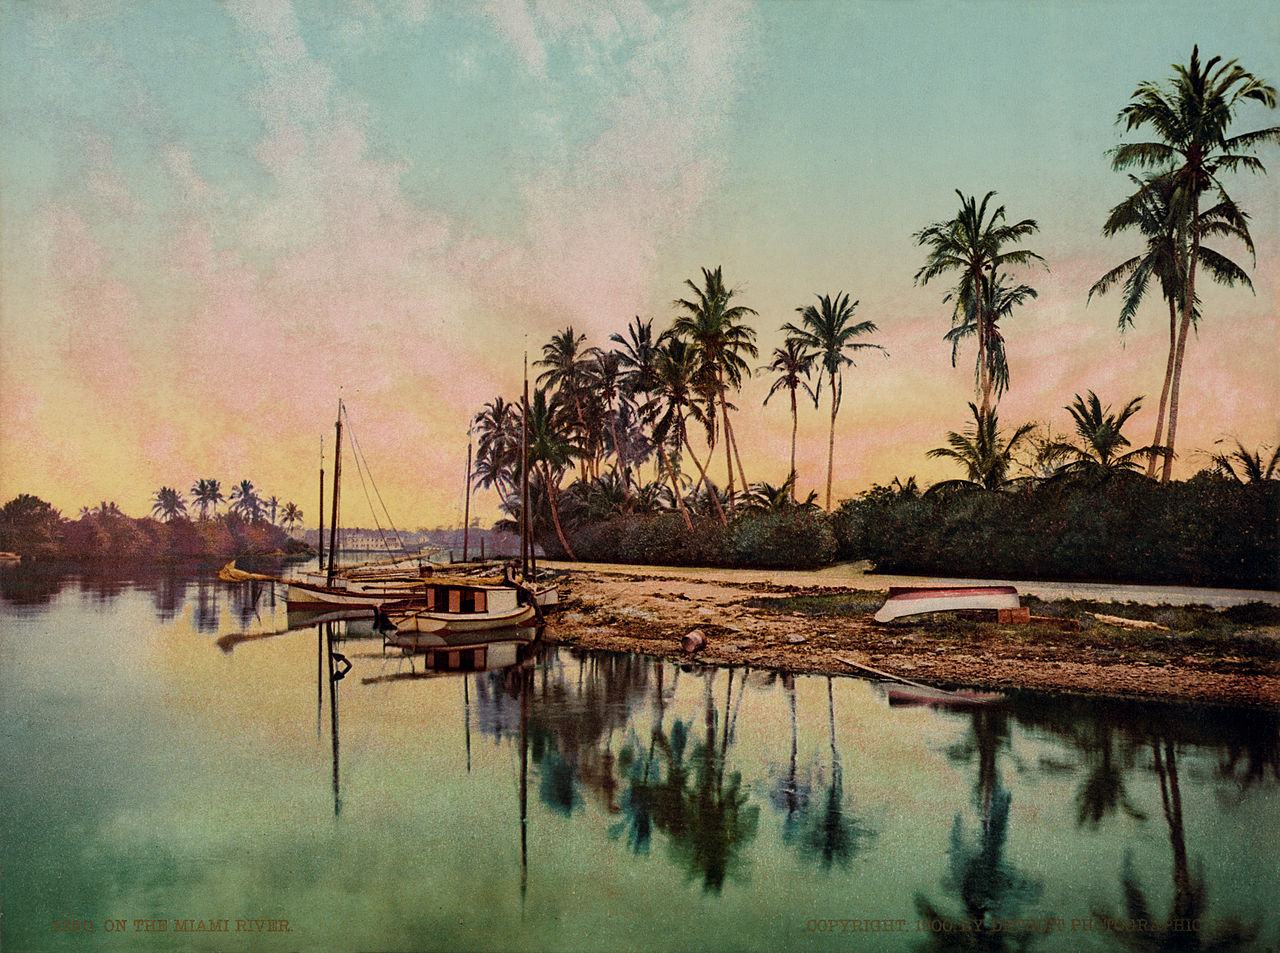 Painting of boats docked on a lake.